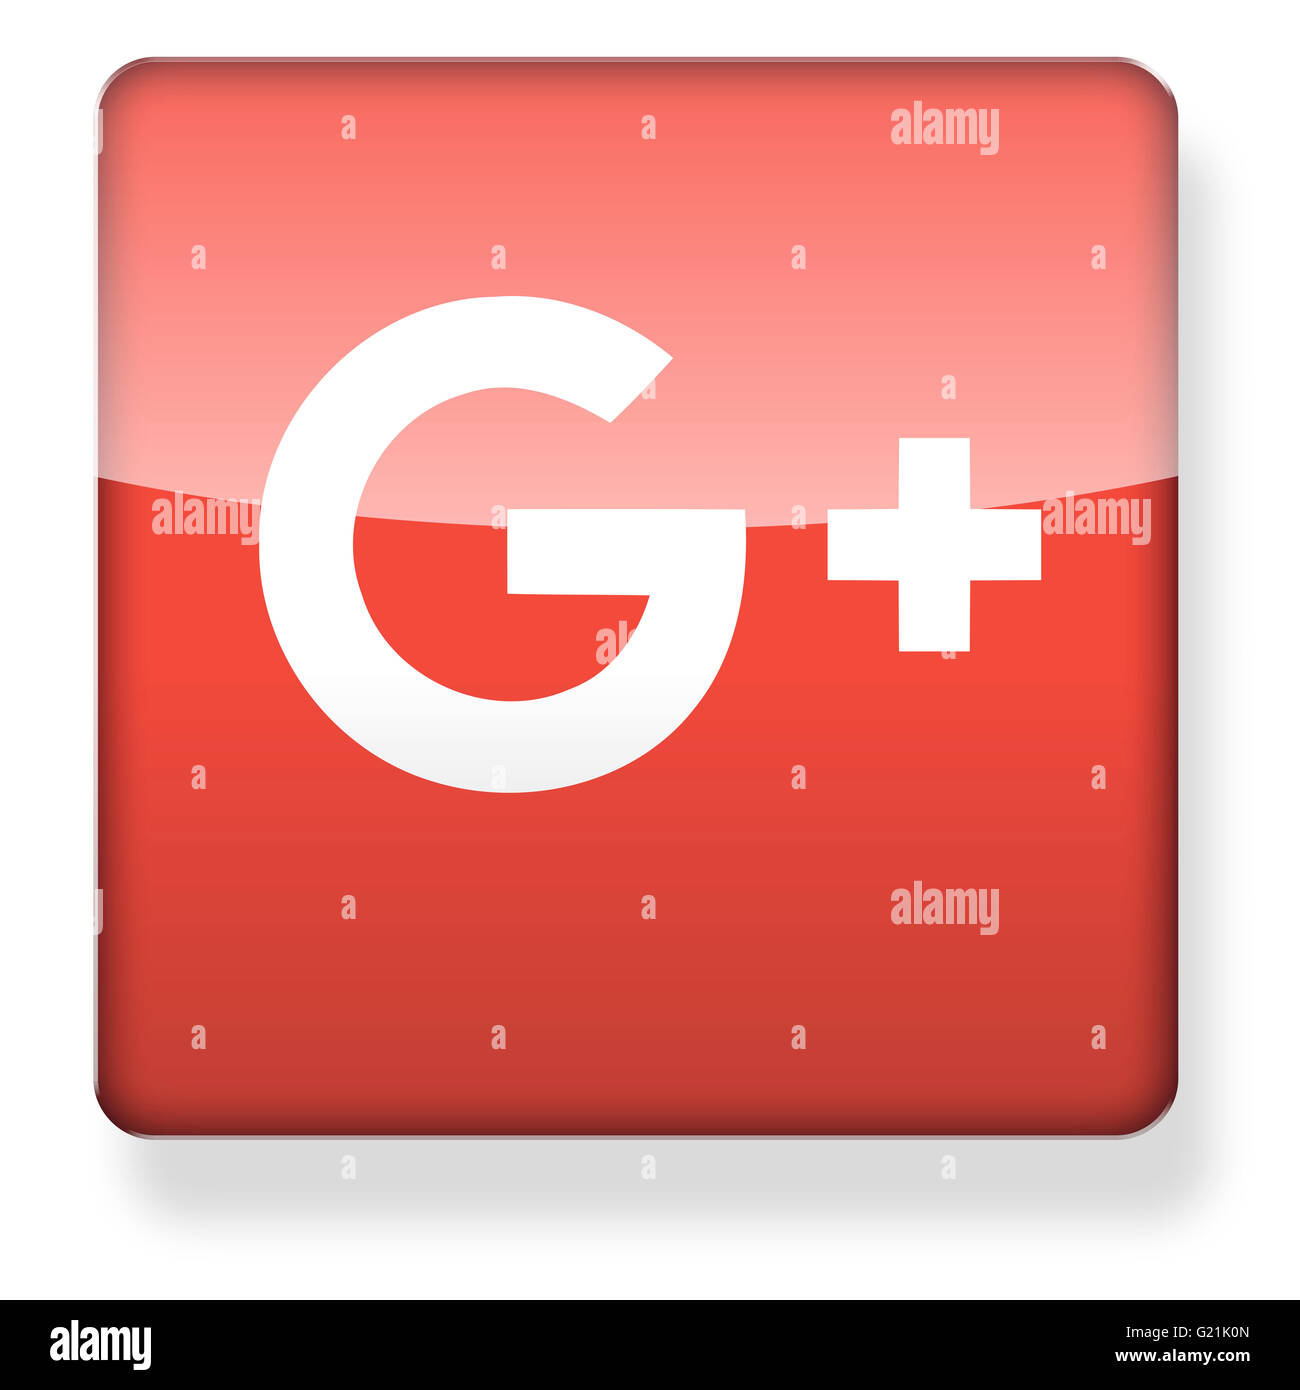 New Google+ logo as an app icon. Clipping path included. Stock Photo